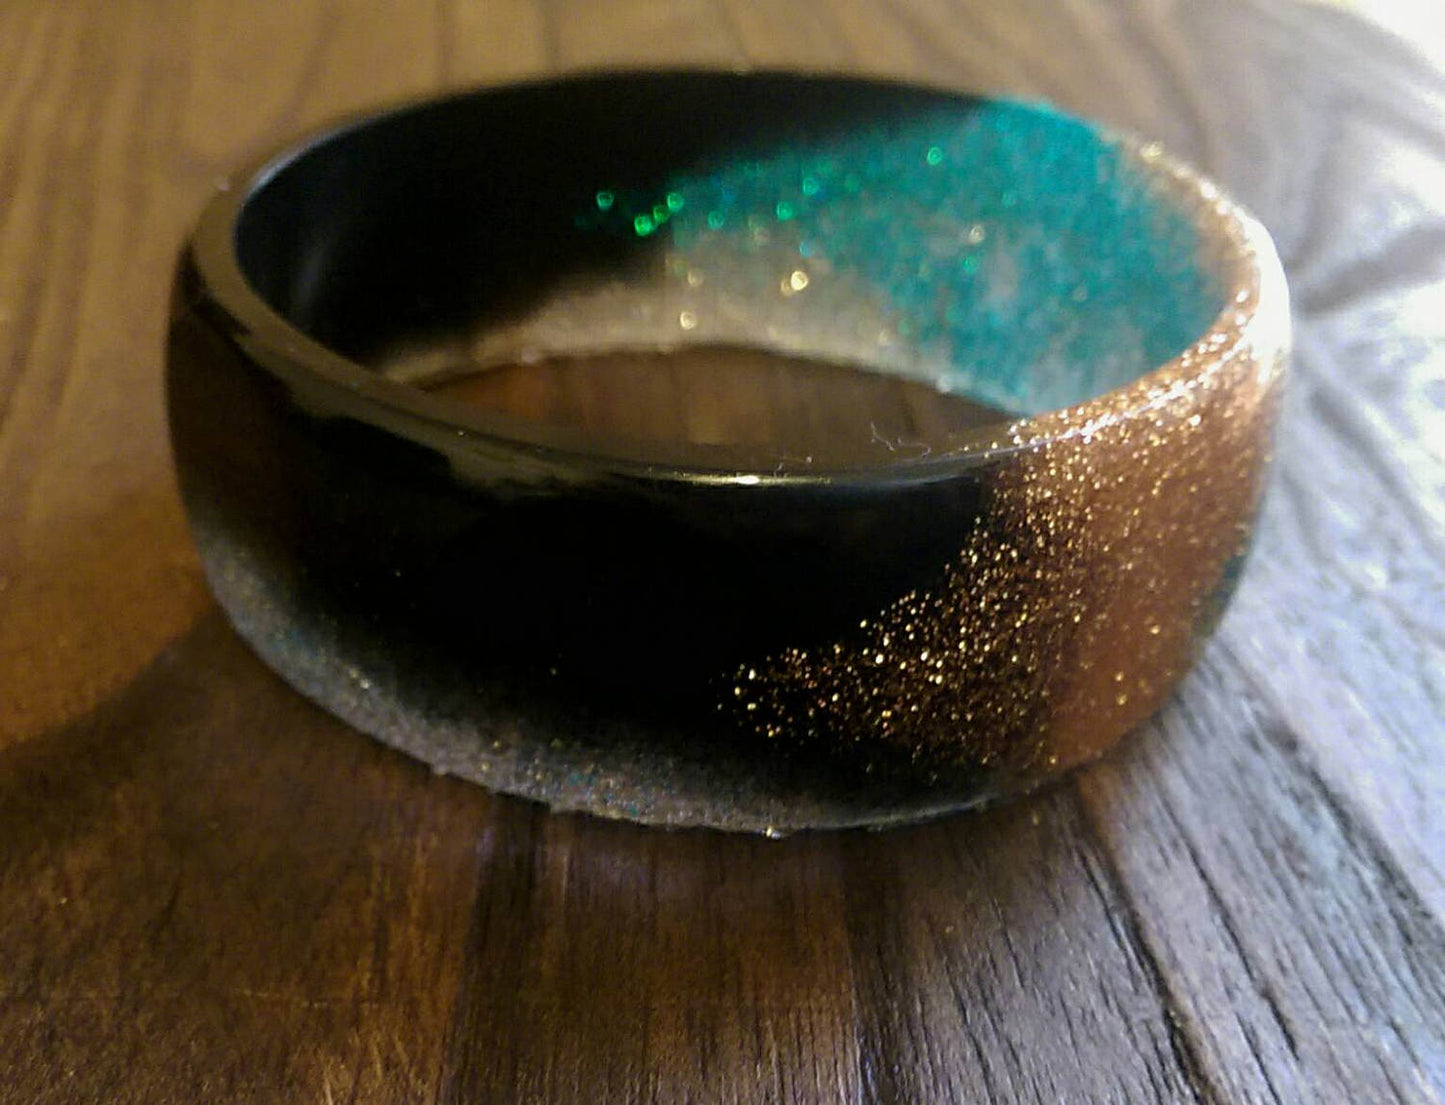 Glamour Statement Resin Bangle mixed with Turquoise & Copper Glitter with Black Handmade